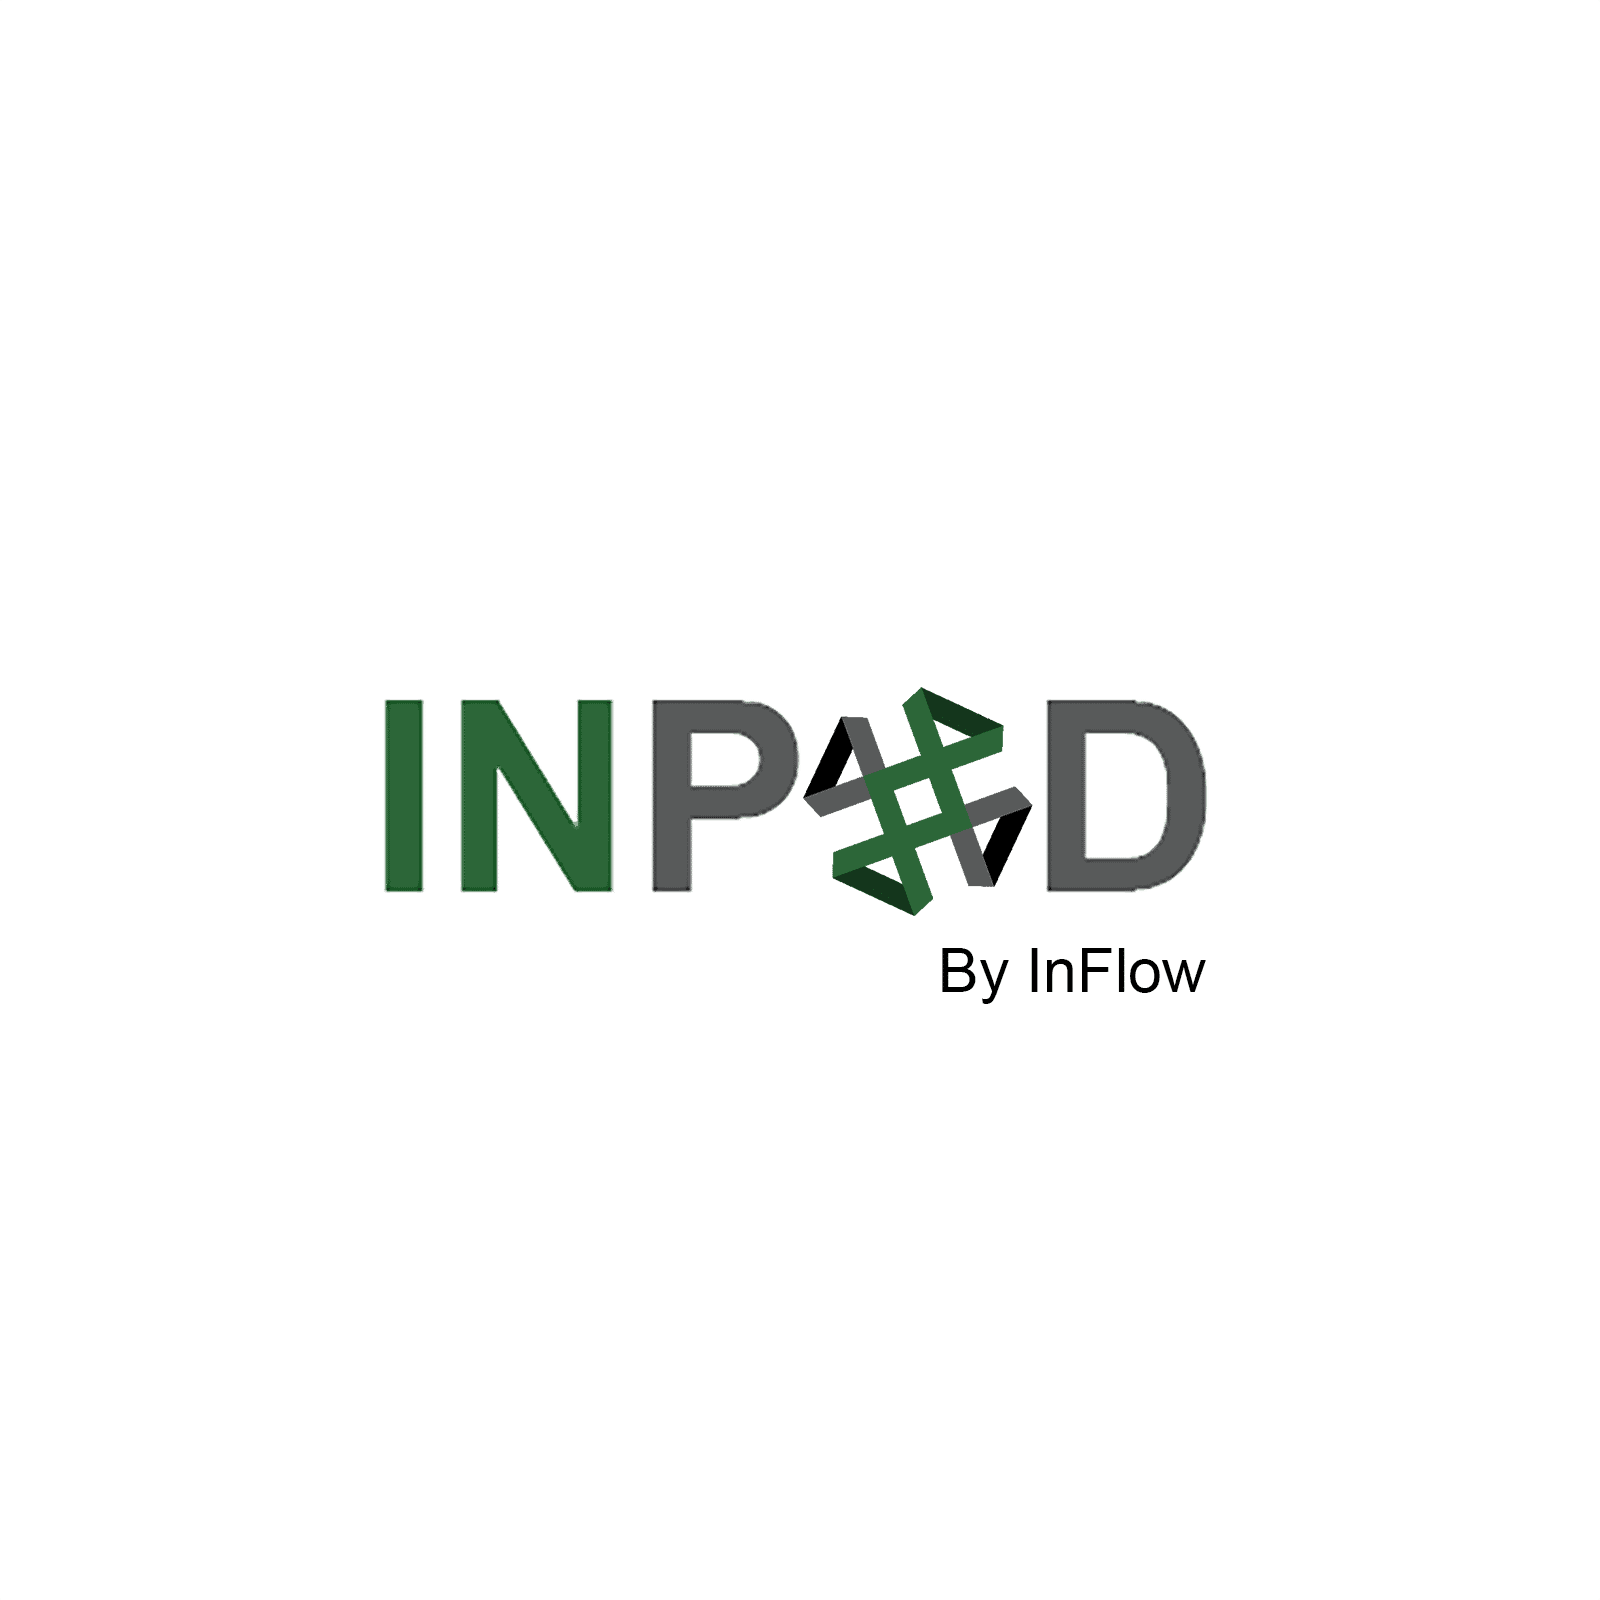 Check out InPOD for my interview with CAELYNX's own Joe Formicola.